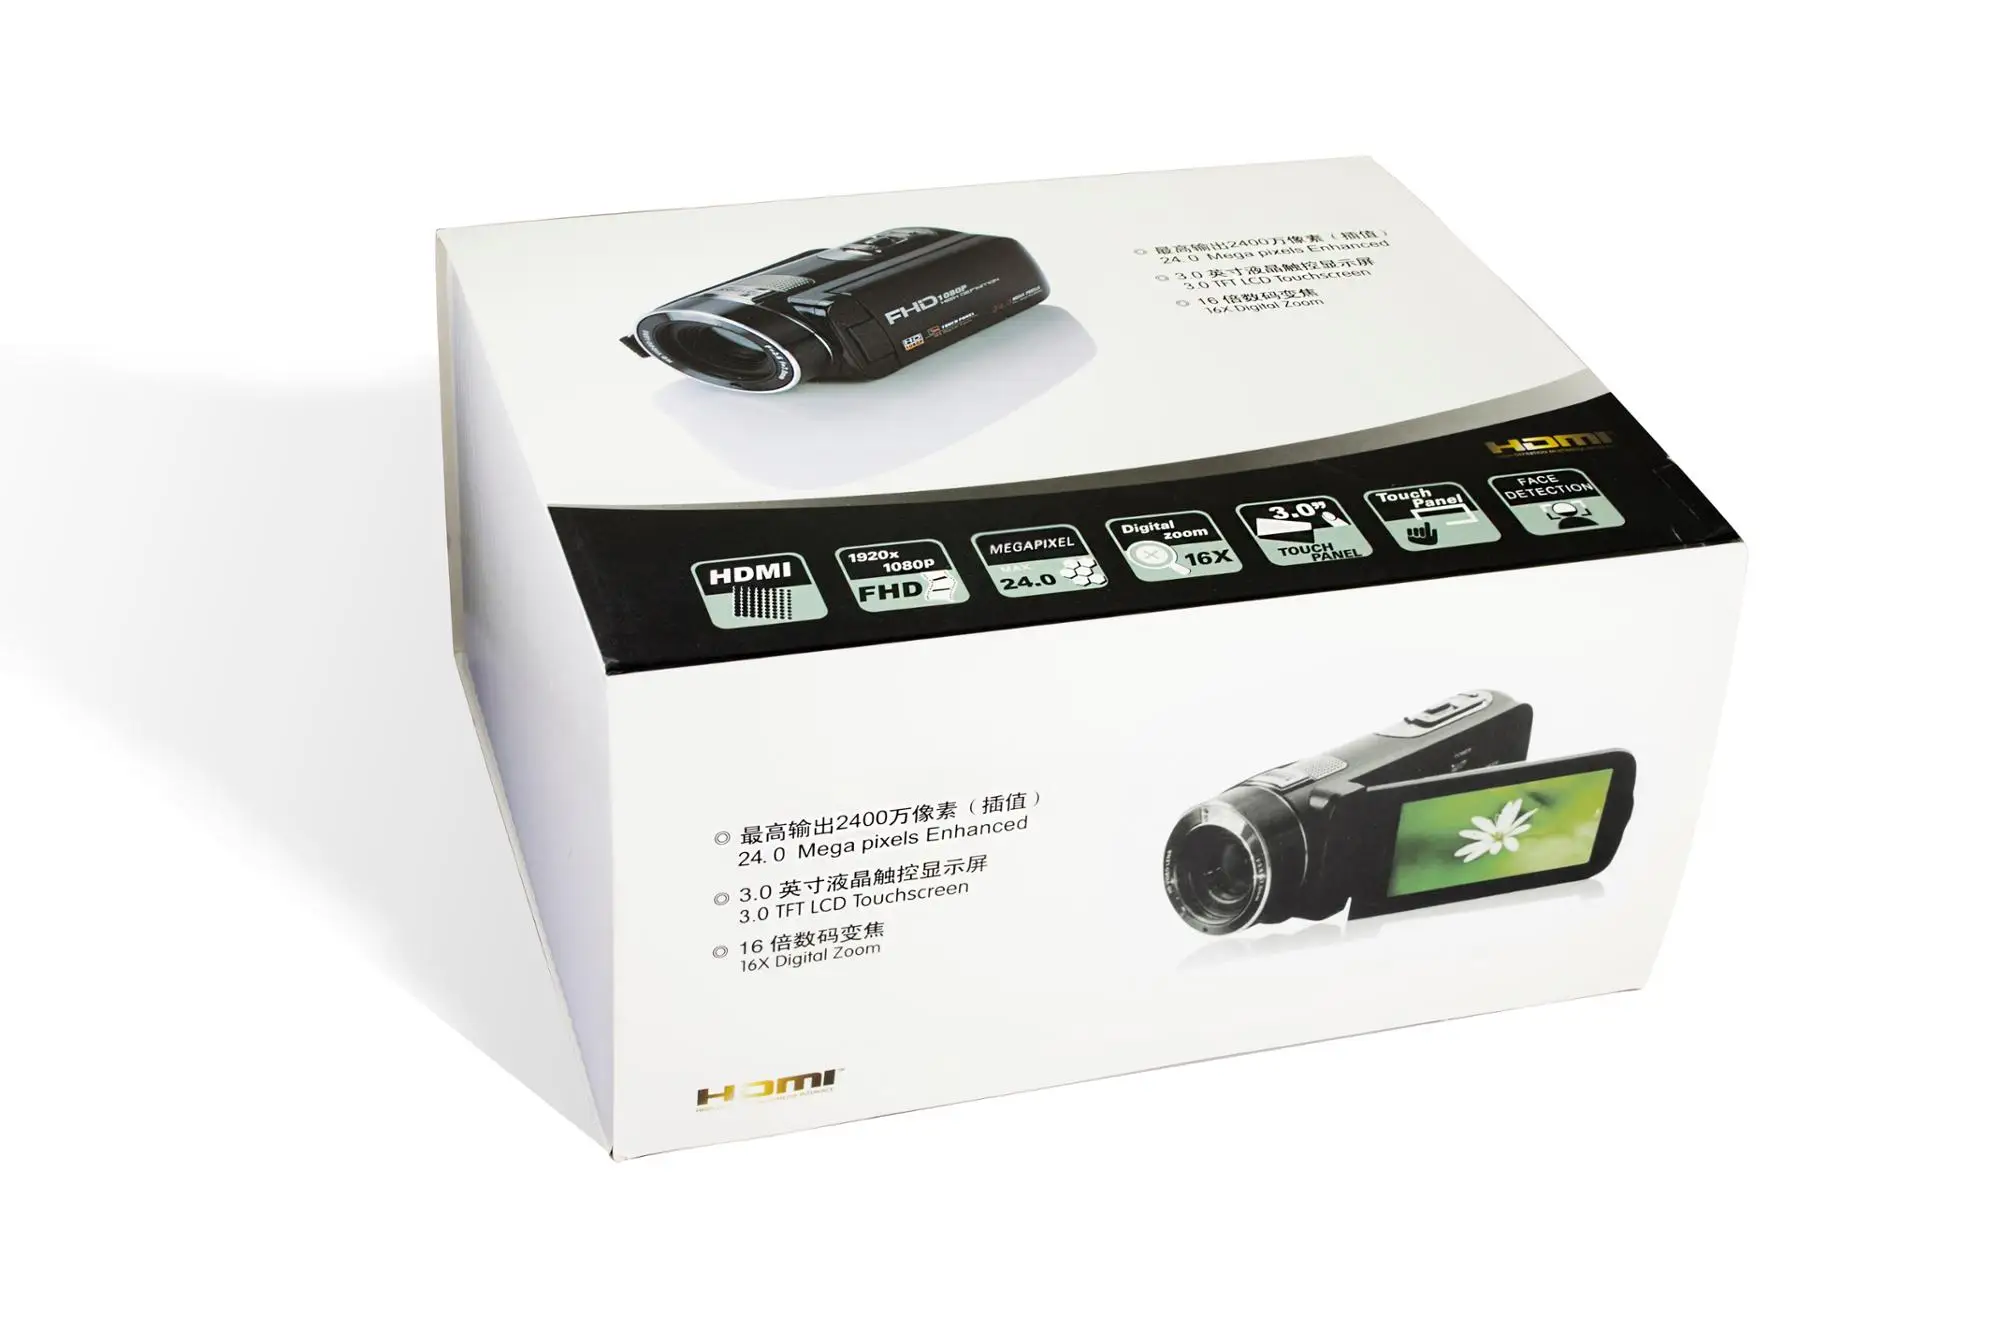 Super 24mp FHD 1080p Professional Digital Video Camera With 3.0"Touch Display